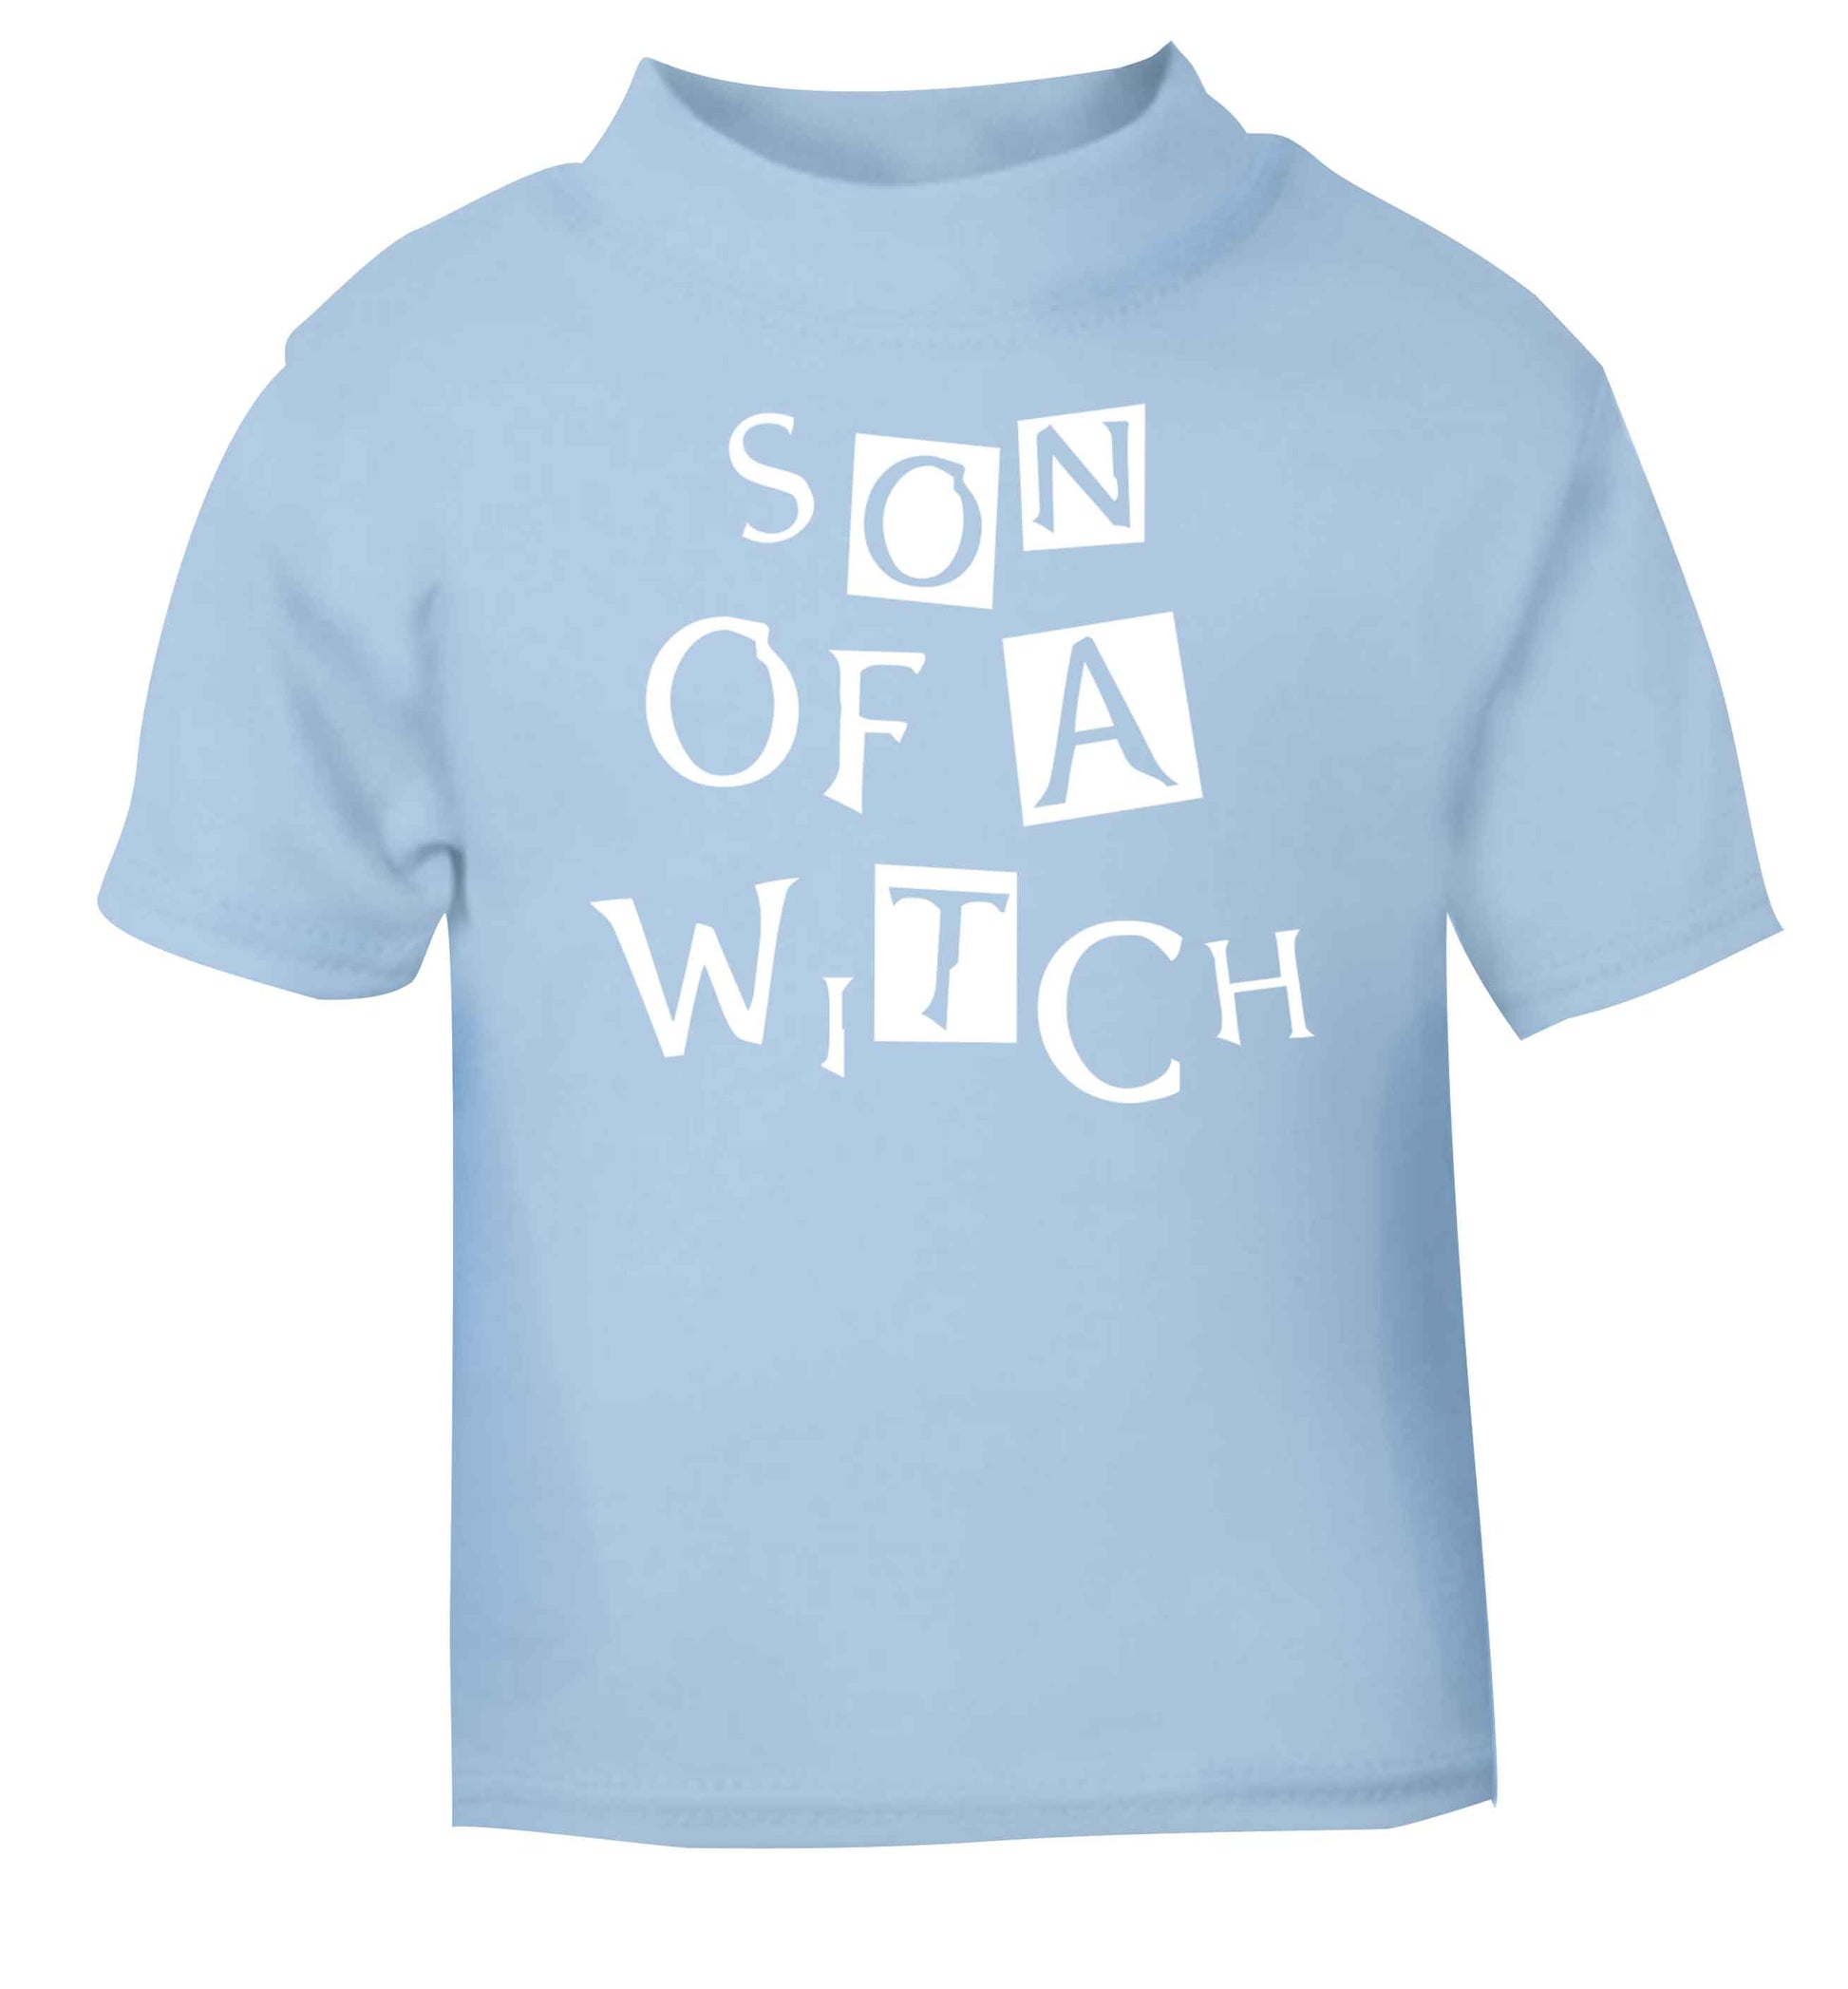 Son of a witch light blue baby toddler Tshirt 2 Years